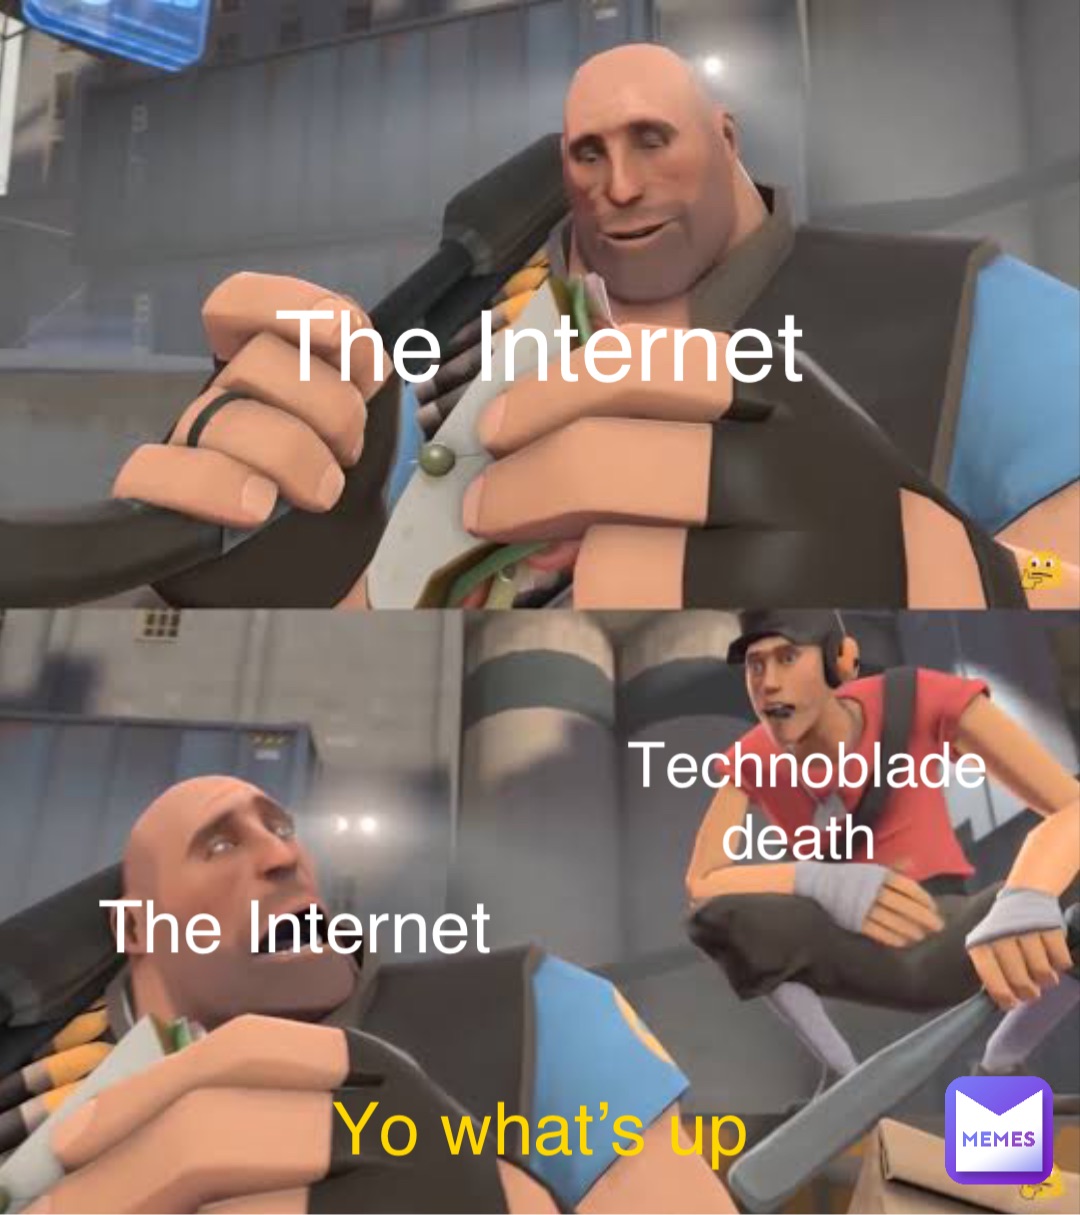 The Internet The Internet Technoblade death Yo what’s up